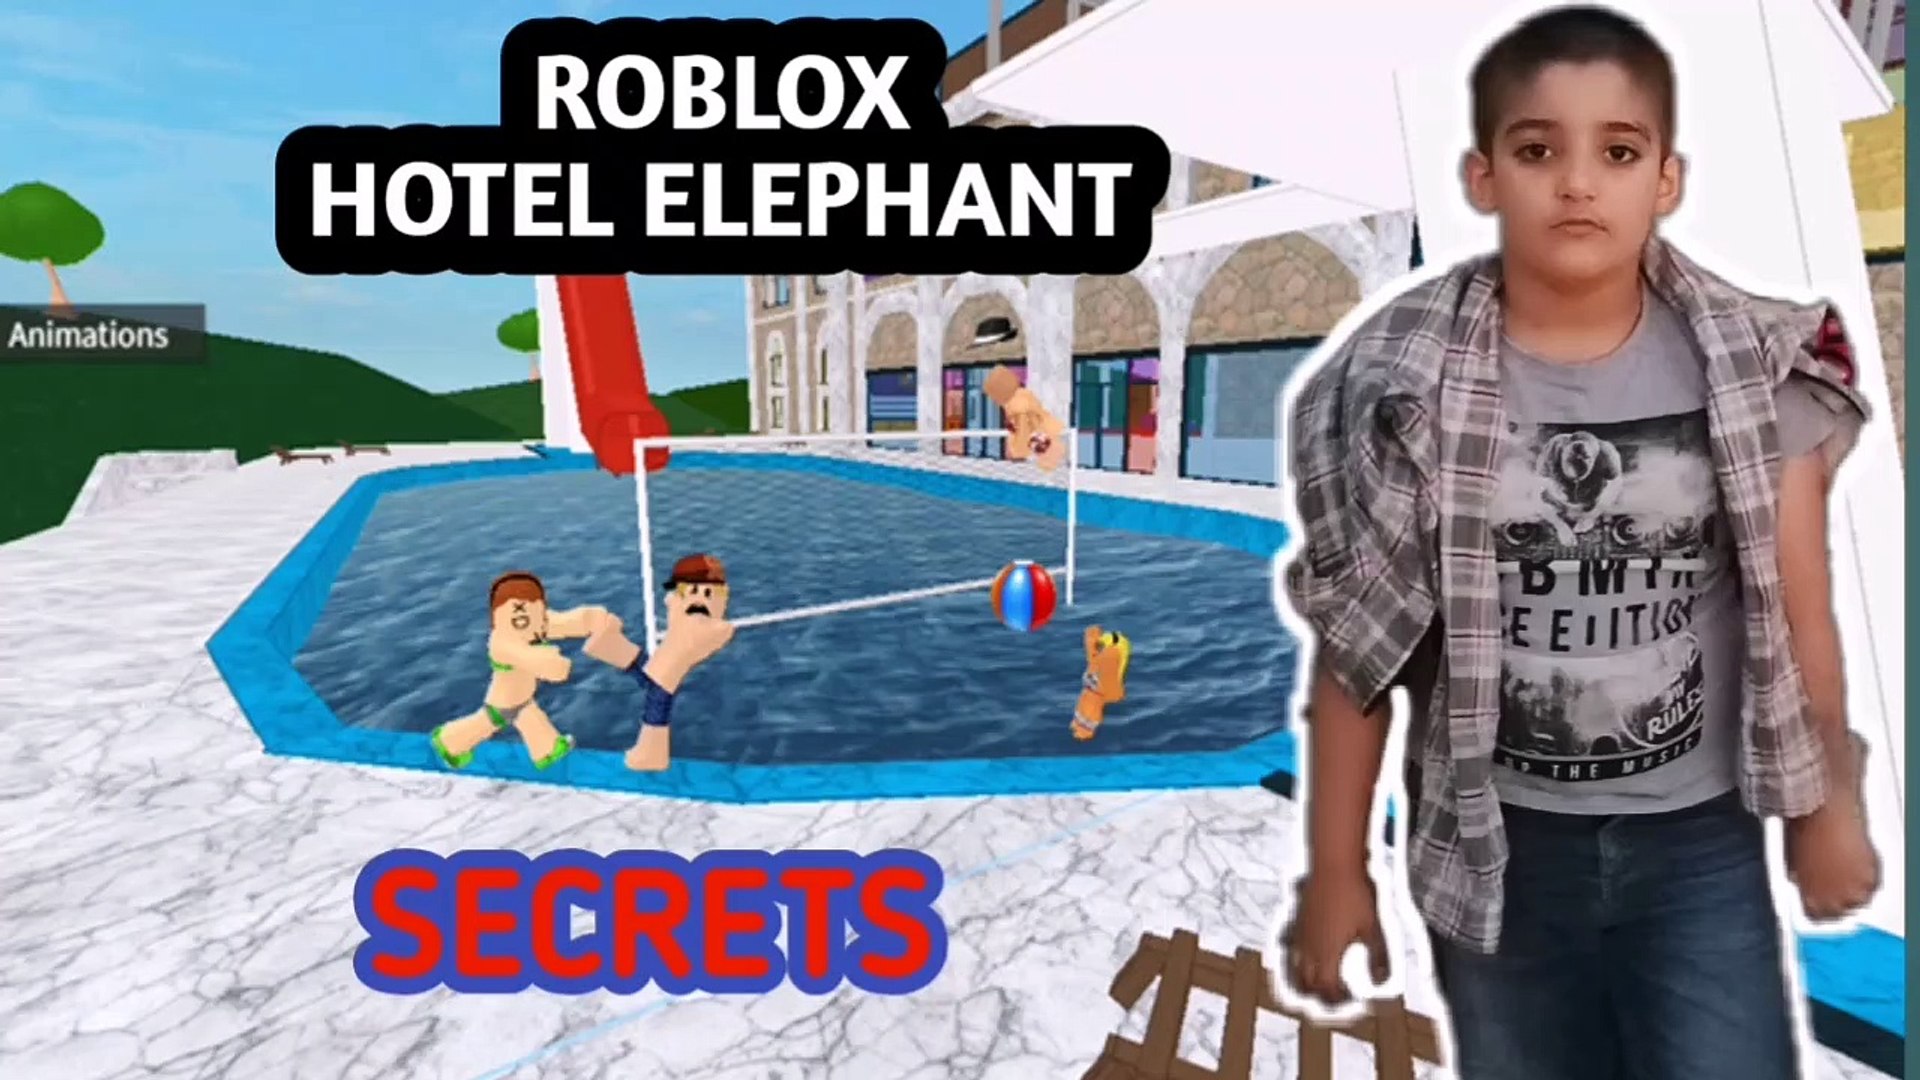 Hotel Elephant Sob Roblox In Sobsamgames Video Dailymotion - roblox games hotel elephant